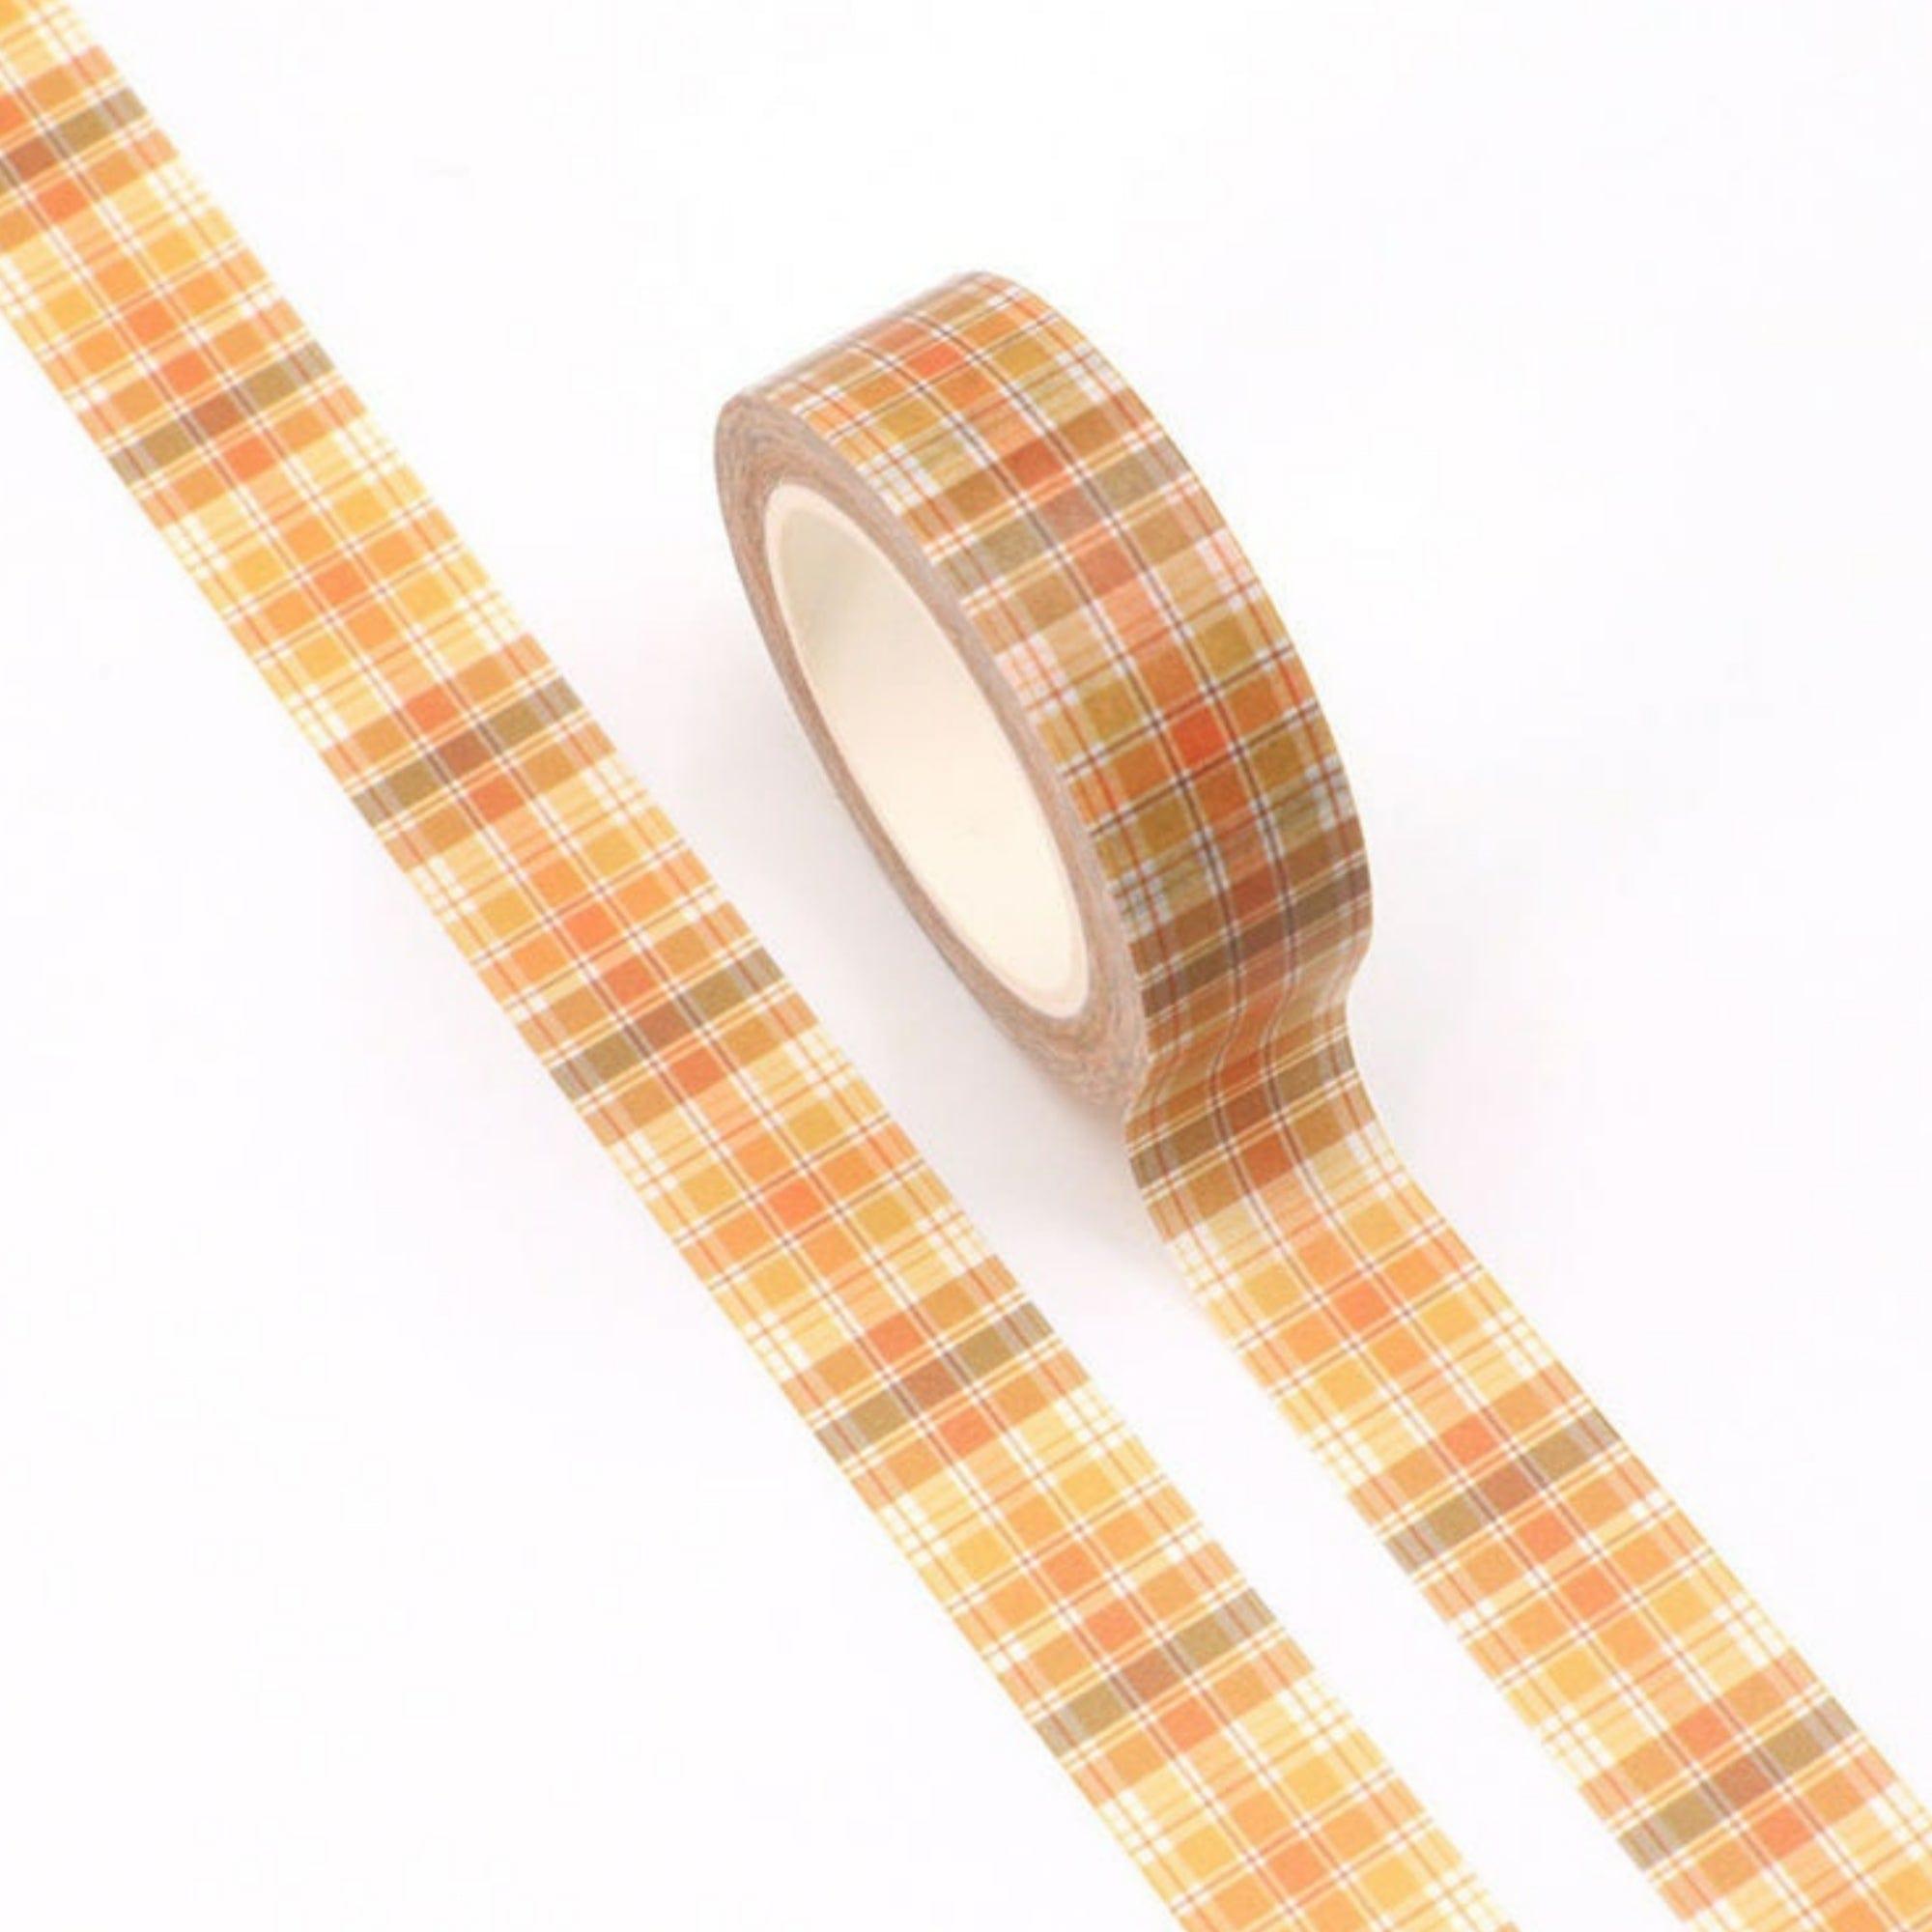 TW Collection Fall Plaid Washi Tape by SSC Designs - 15mm x 30 Feet